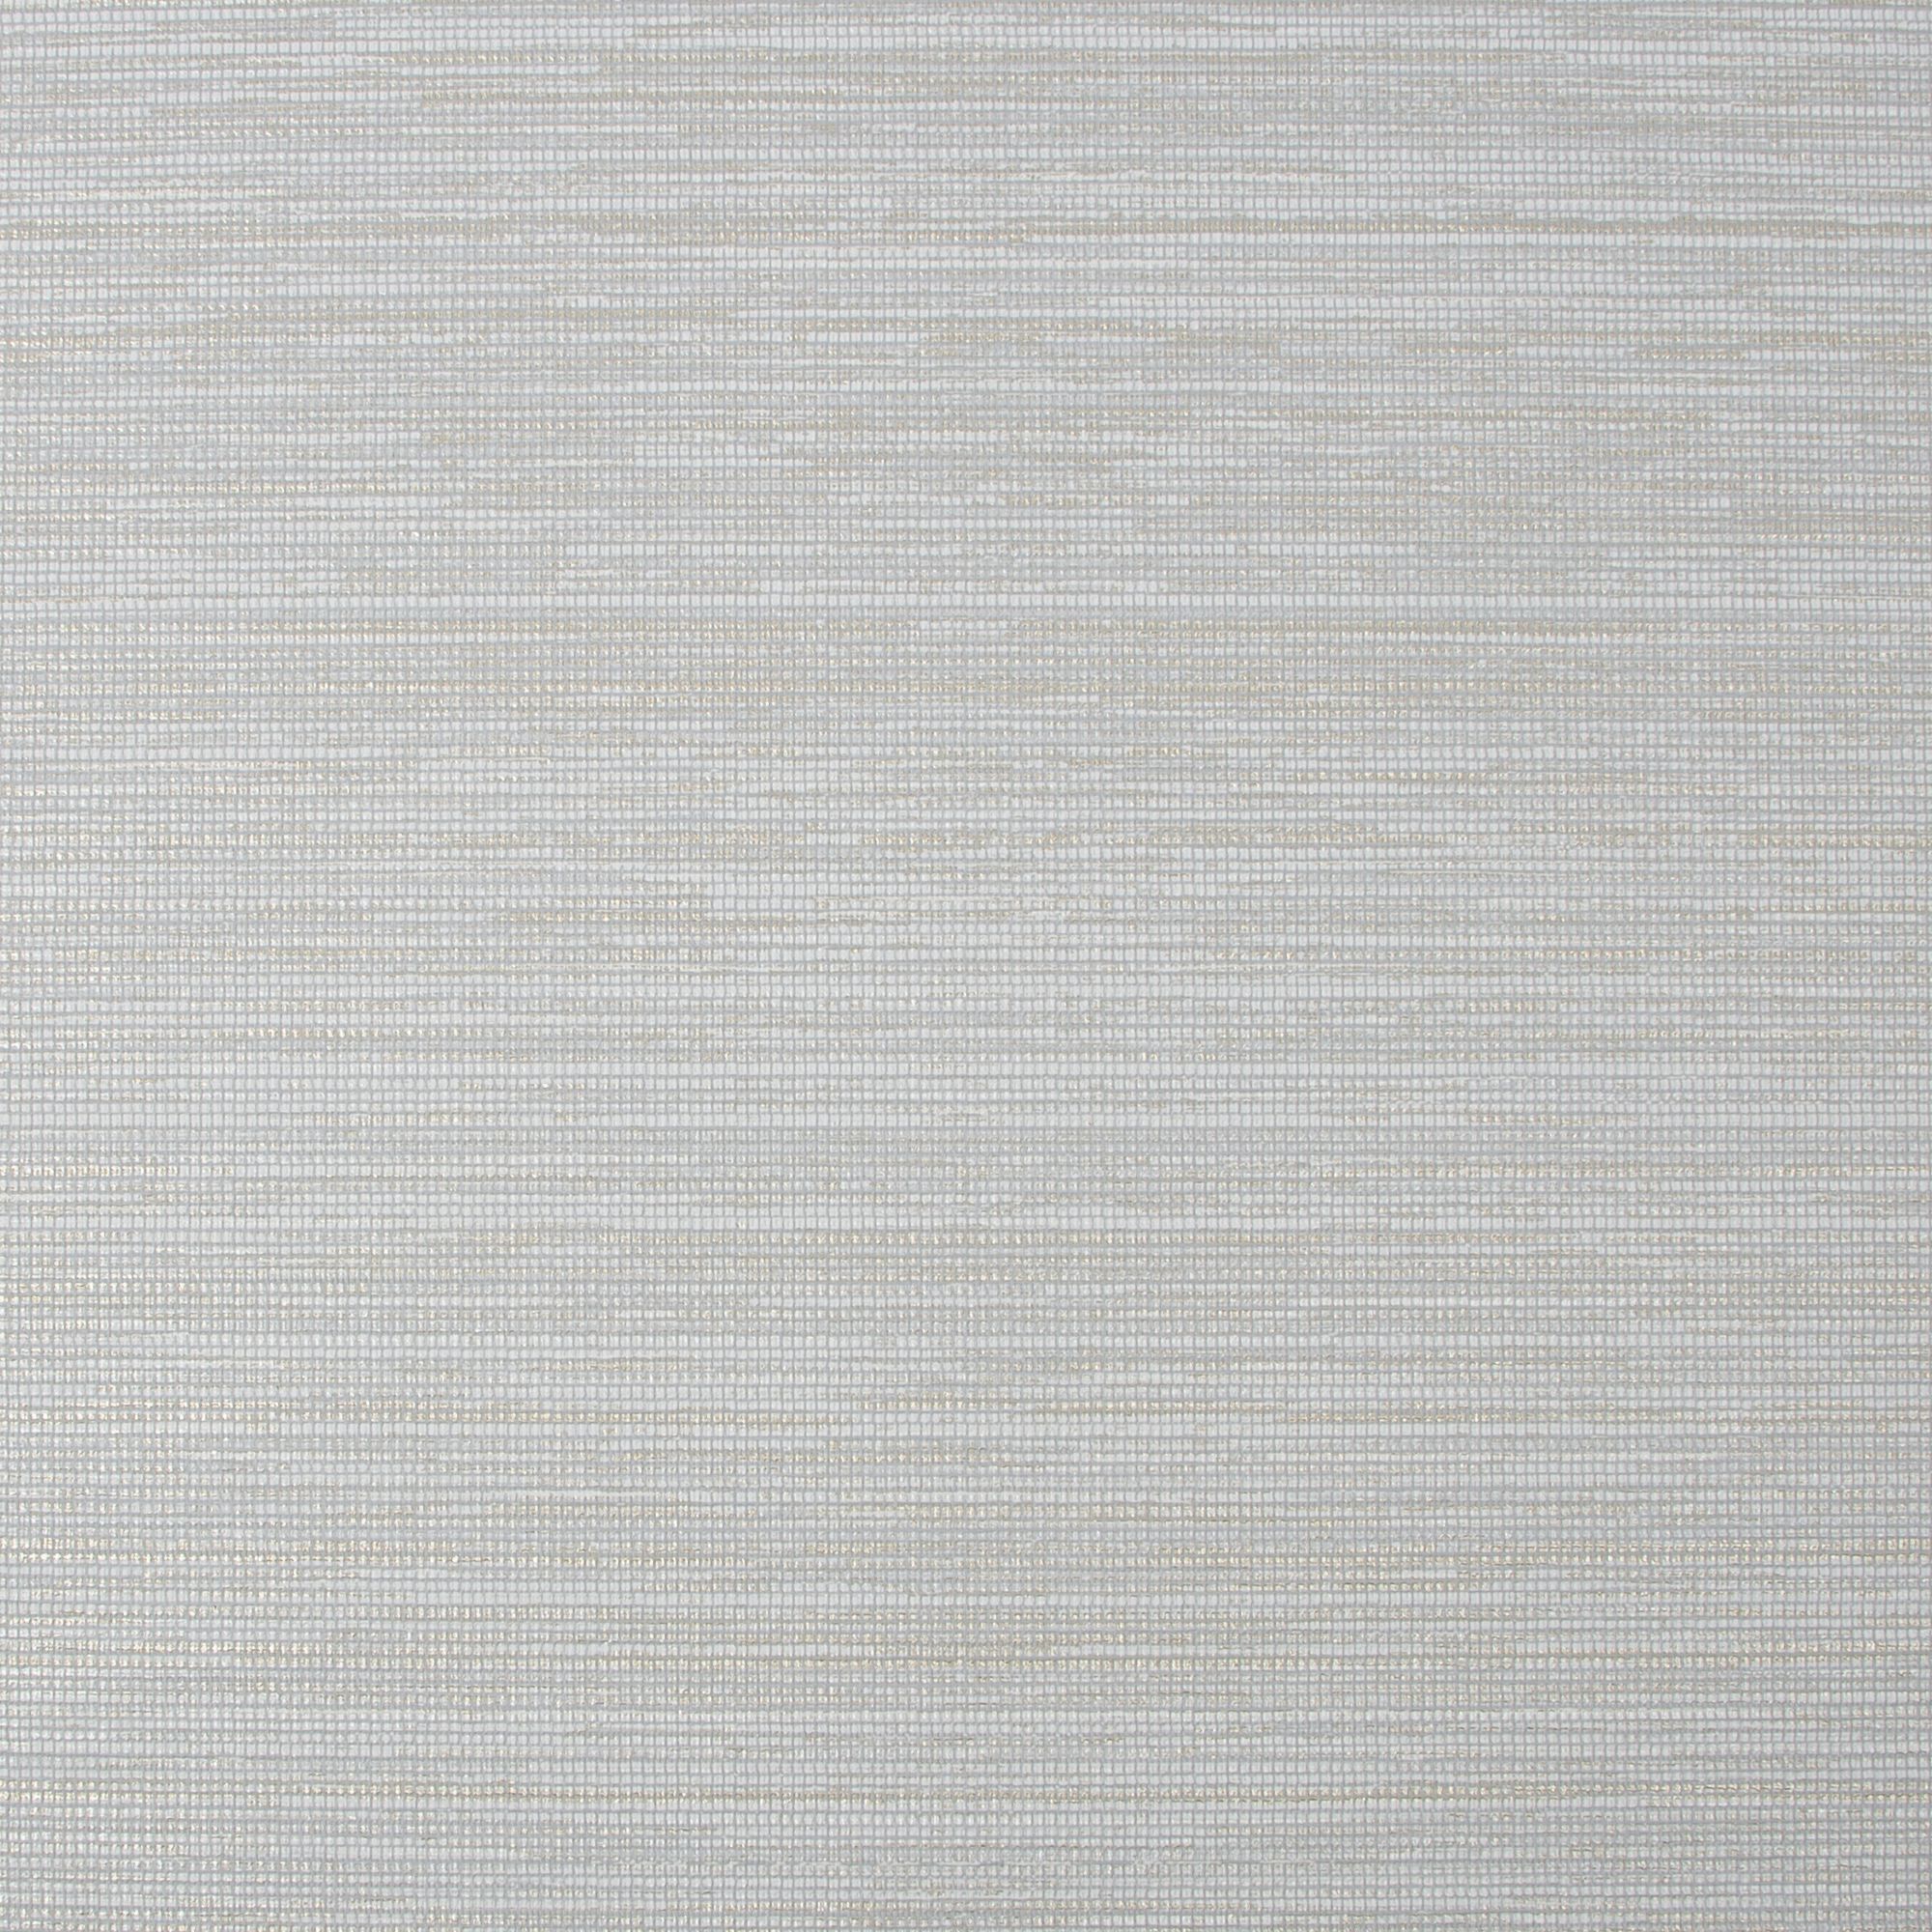 Boutique Gilded texture Moonstone Grasscloth Silver effect Textured Wallpaper Sample